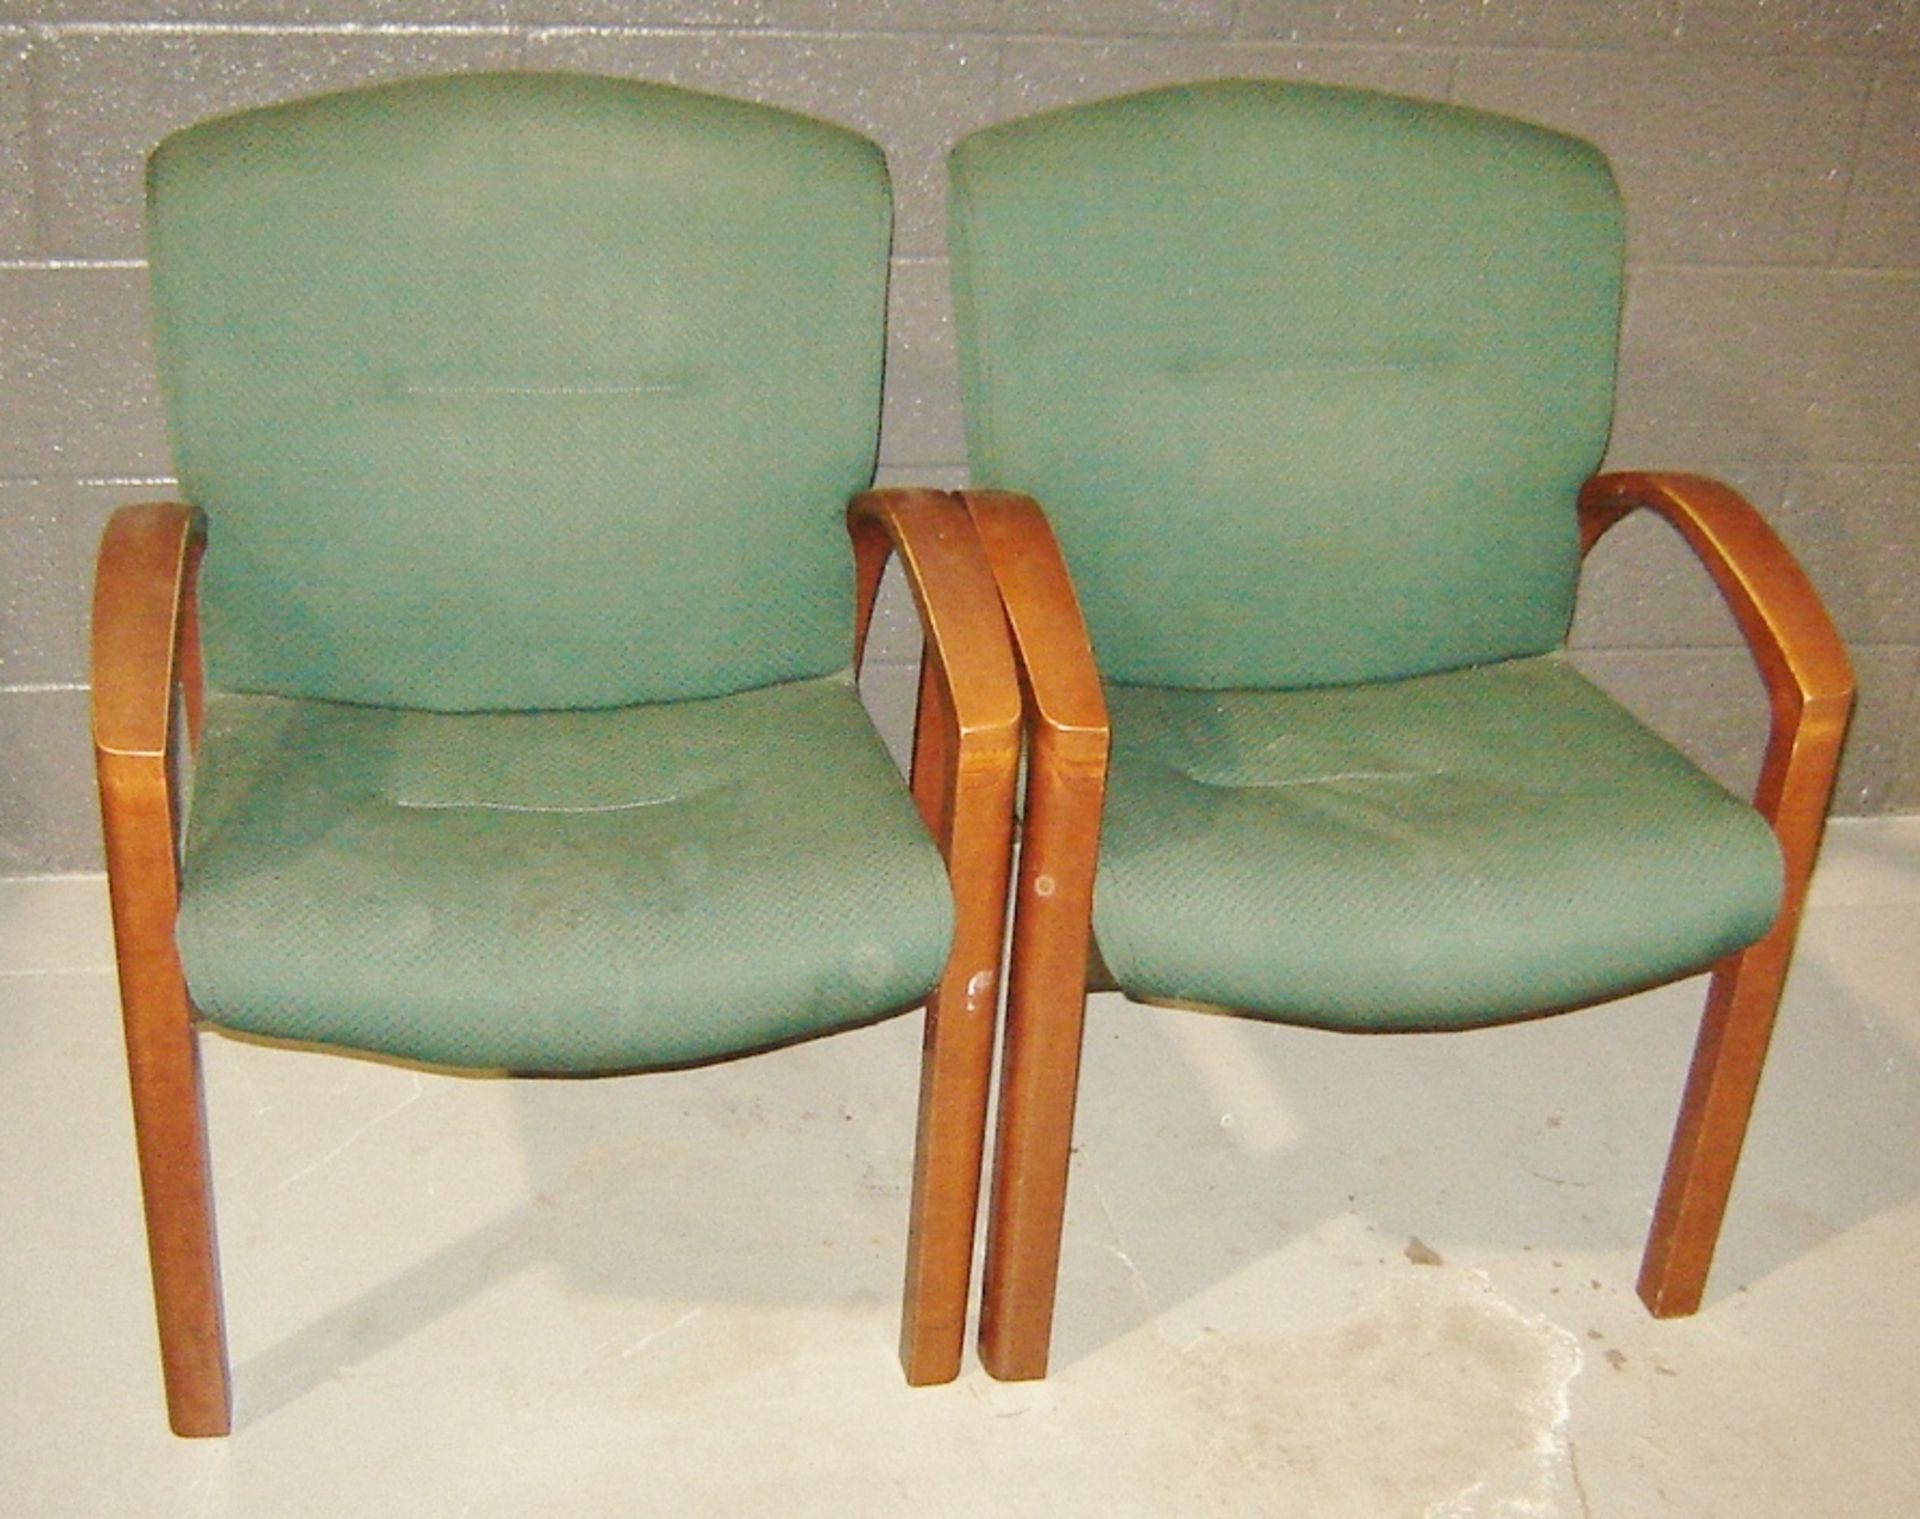 Upholstered & Wooden Frame Chairs